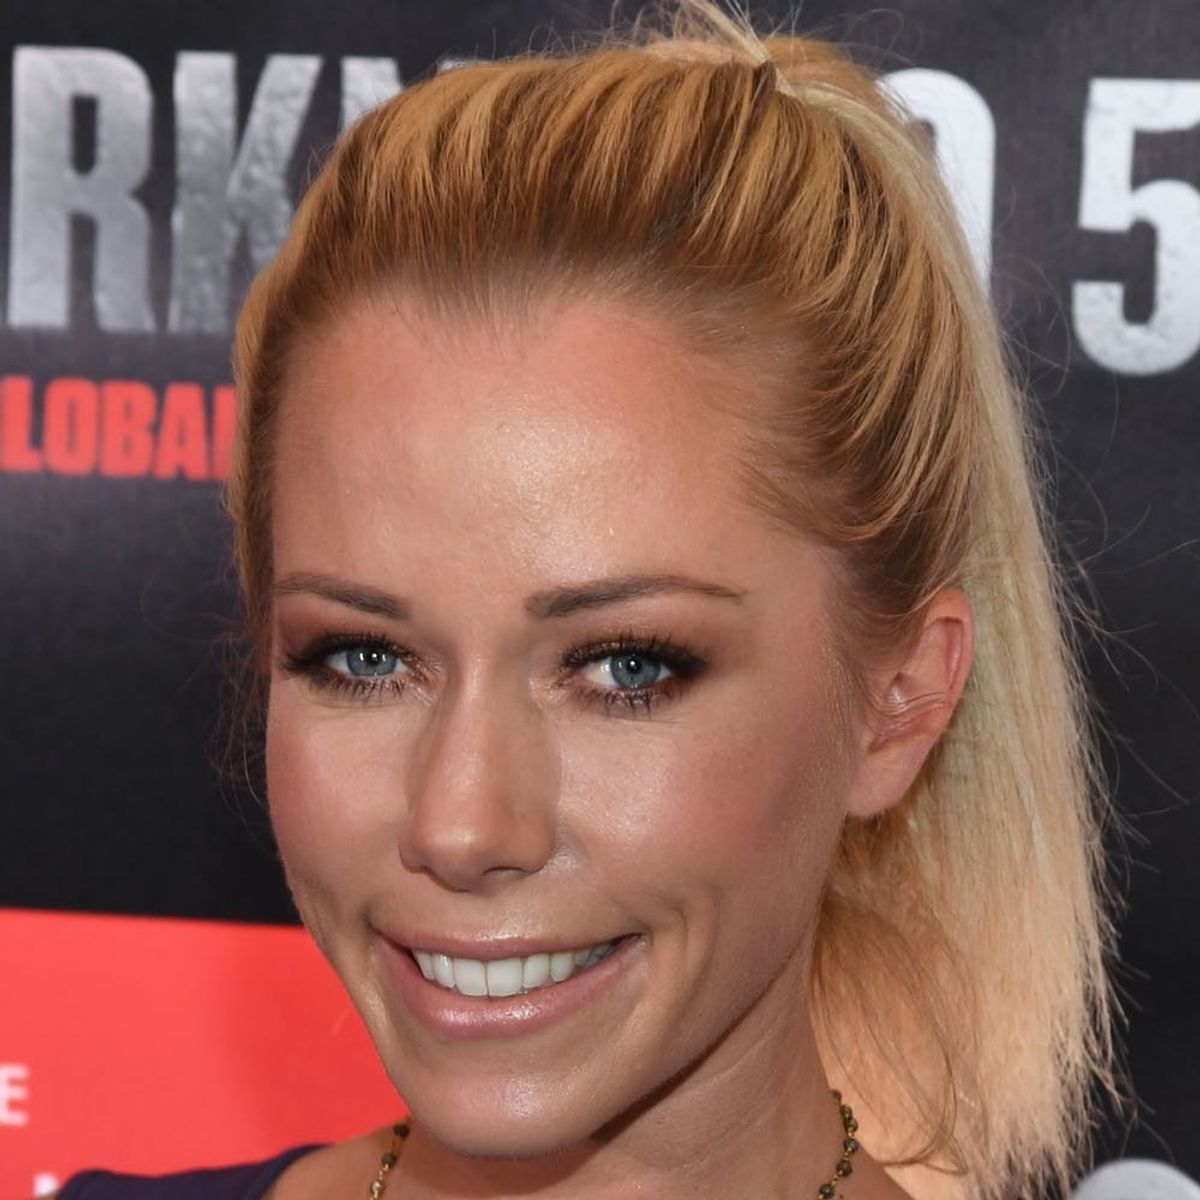 Kendra Wilkinson Baskett Has Been Rushed to the ER With Illness